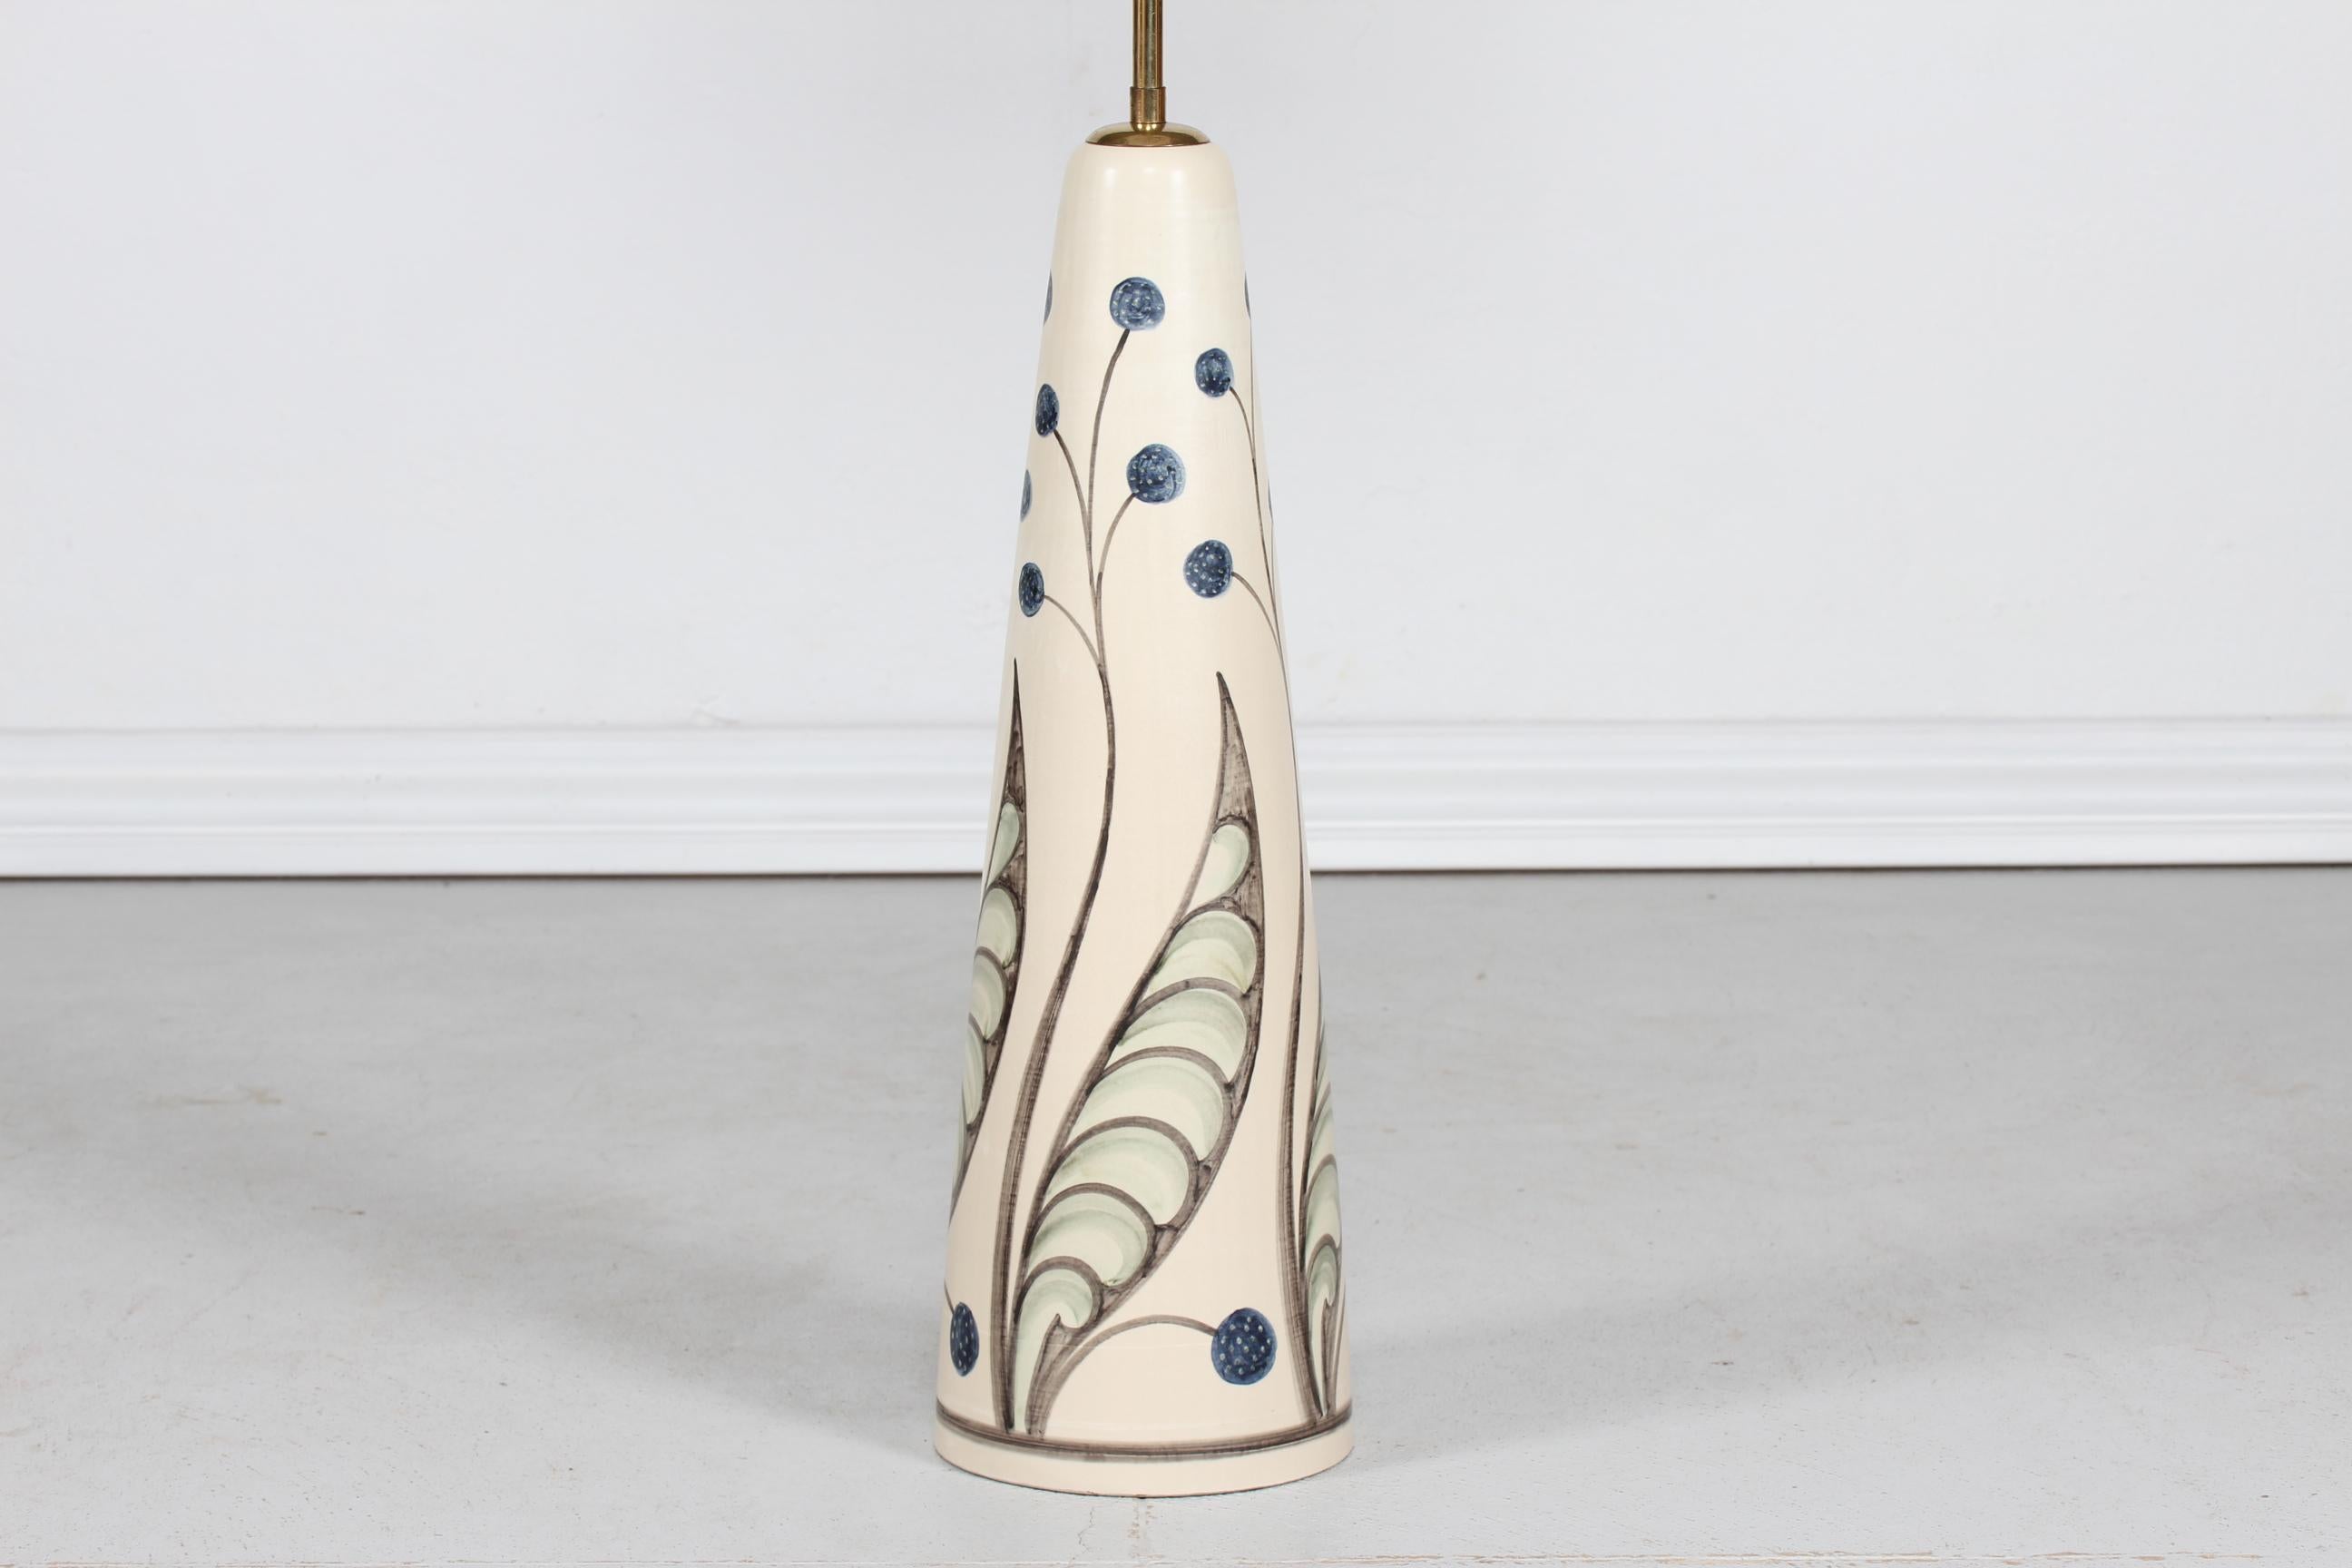 Huge conical hand painted ceramic floor lamp by the Danish artist Rigmor Nielsen for Søholm, Bornholm, Denmark.
The ceramic foot is decorated with a flower motif on an off-white glaze.
It has a brass stem and Included is a new lampshade designed